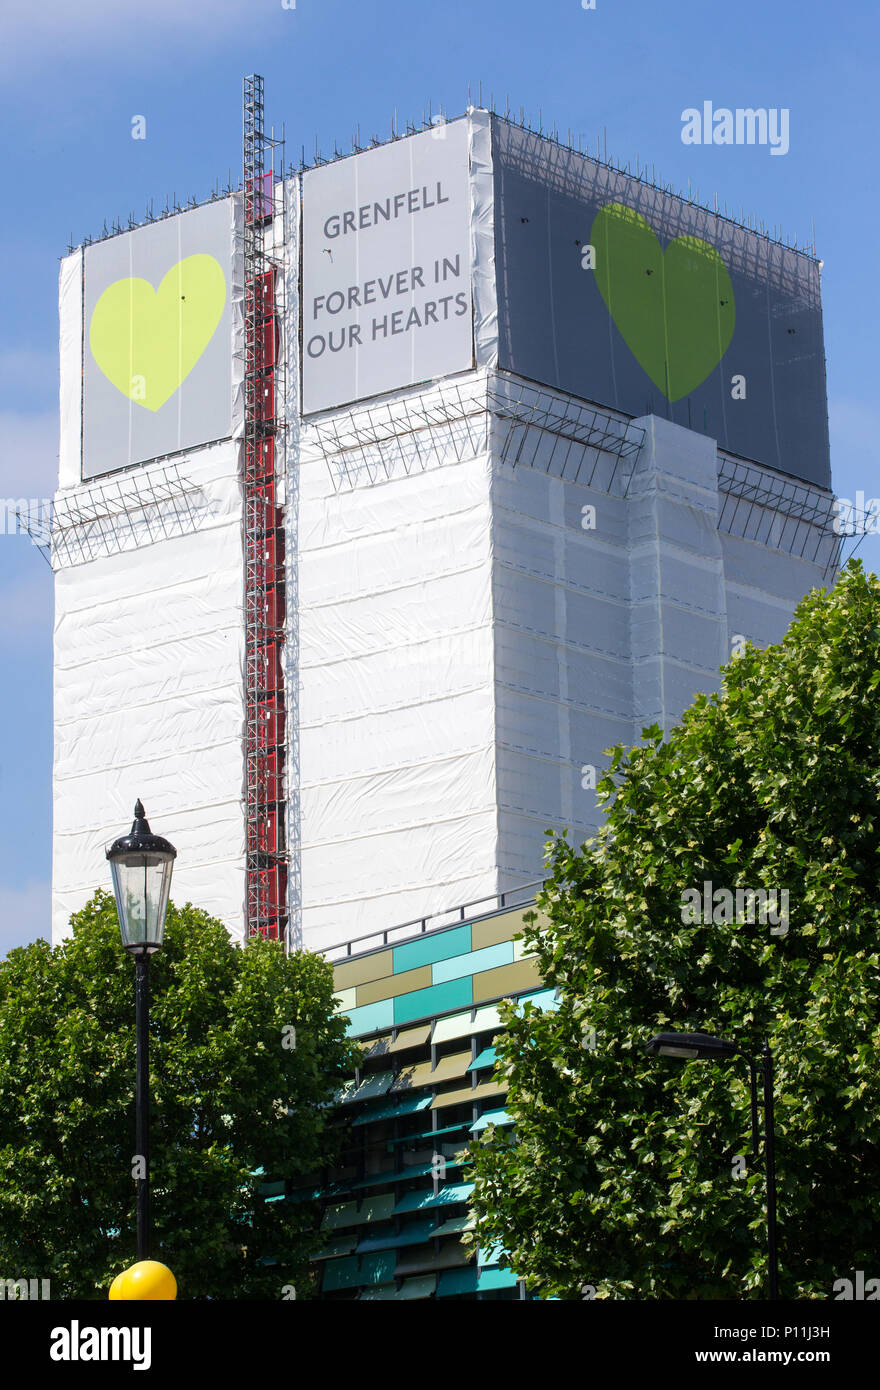 Grenfell Tower where at least 72 people died after a fire broke out on June 14th 2017 in North Kensington with the slogan 'Forever in our Hearts'. Stock Photo